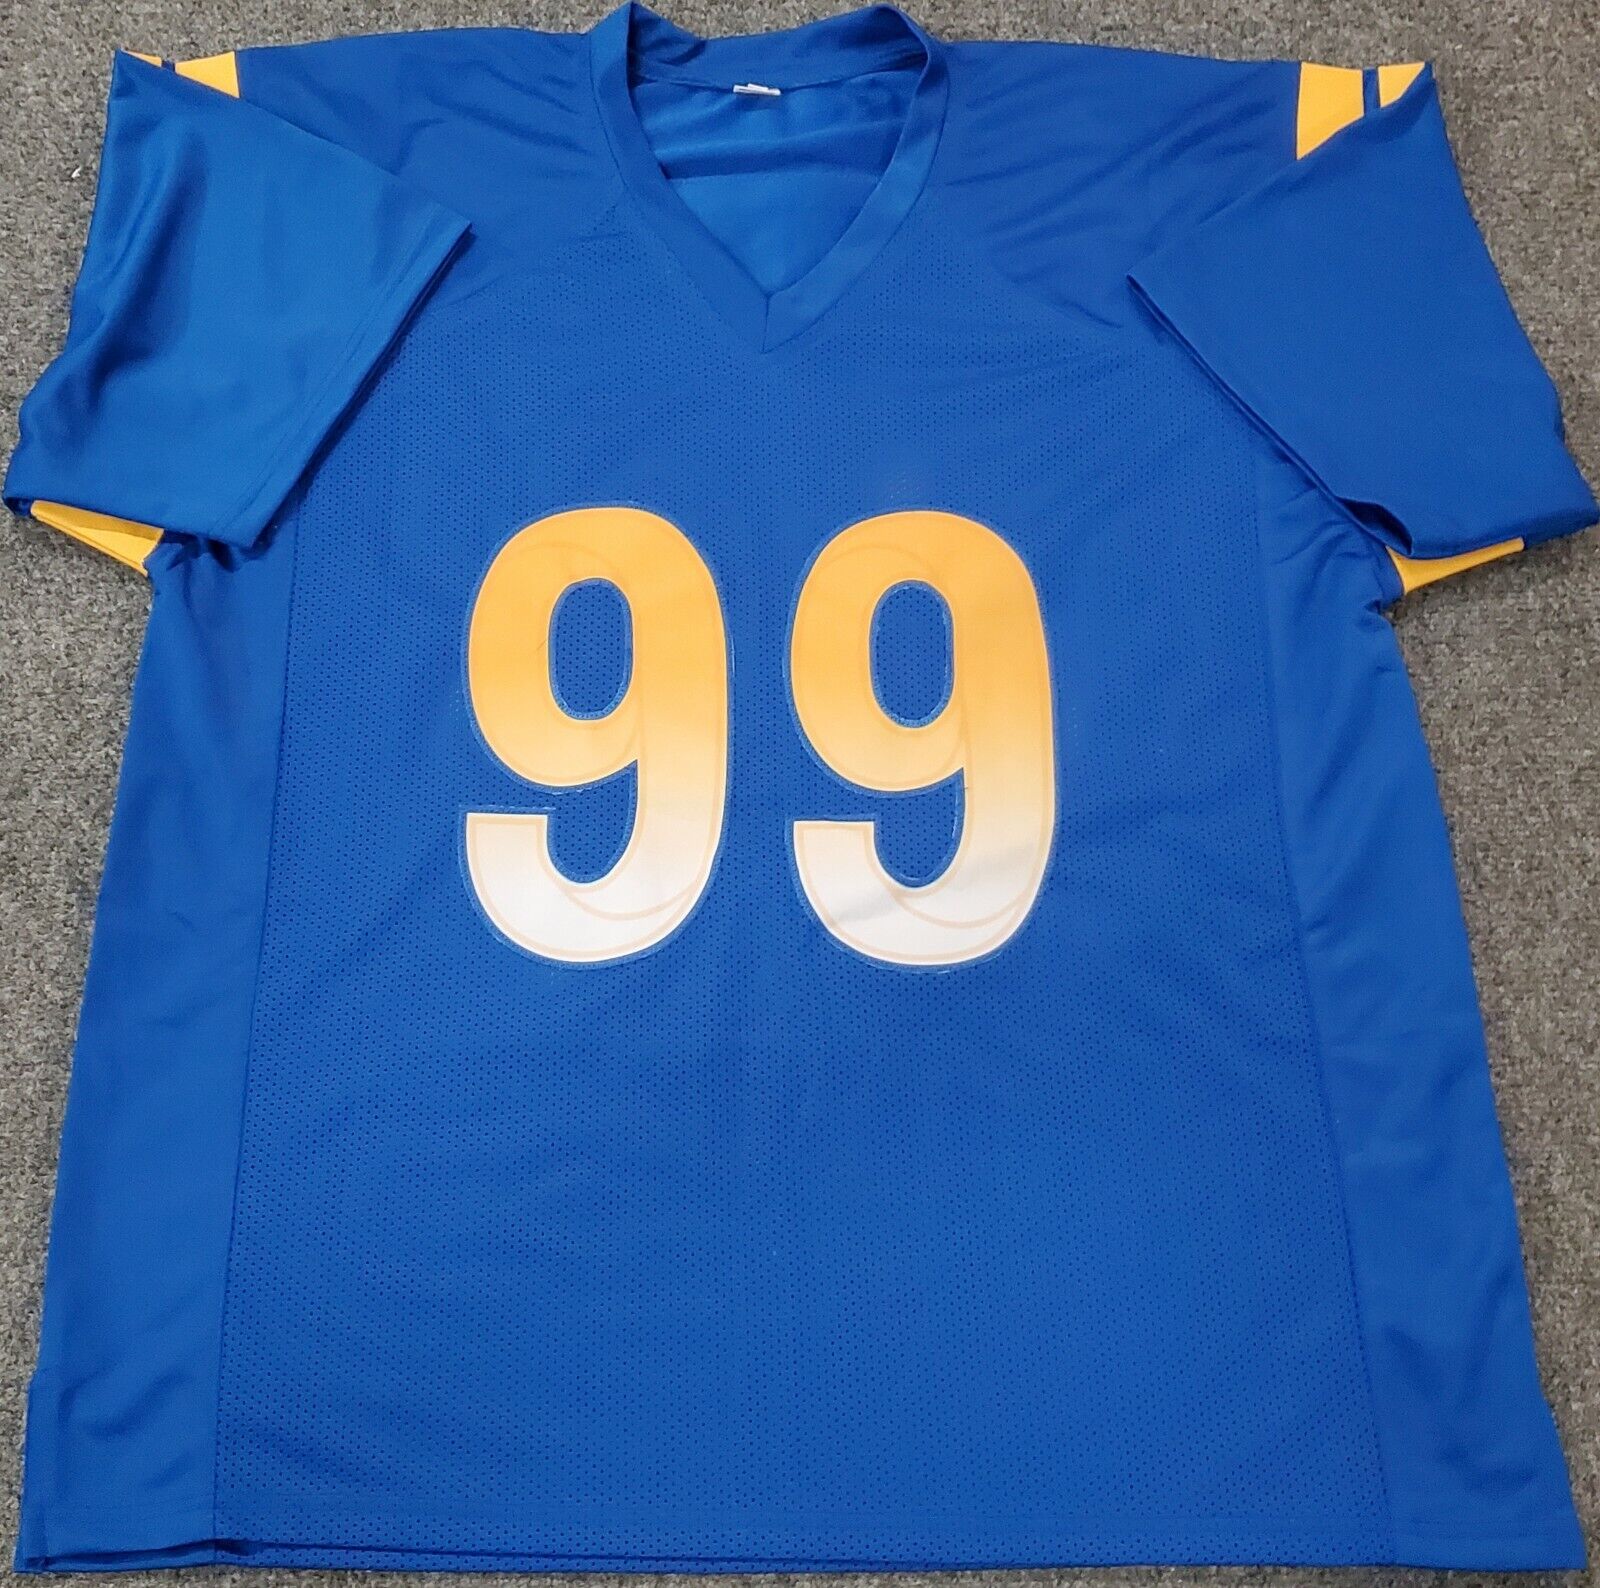 los angeles rams authentic jersey